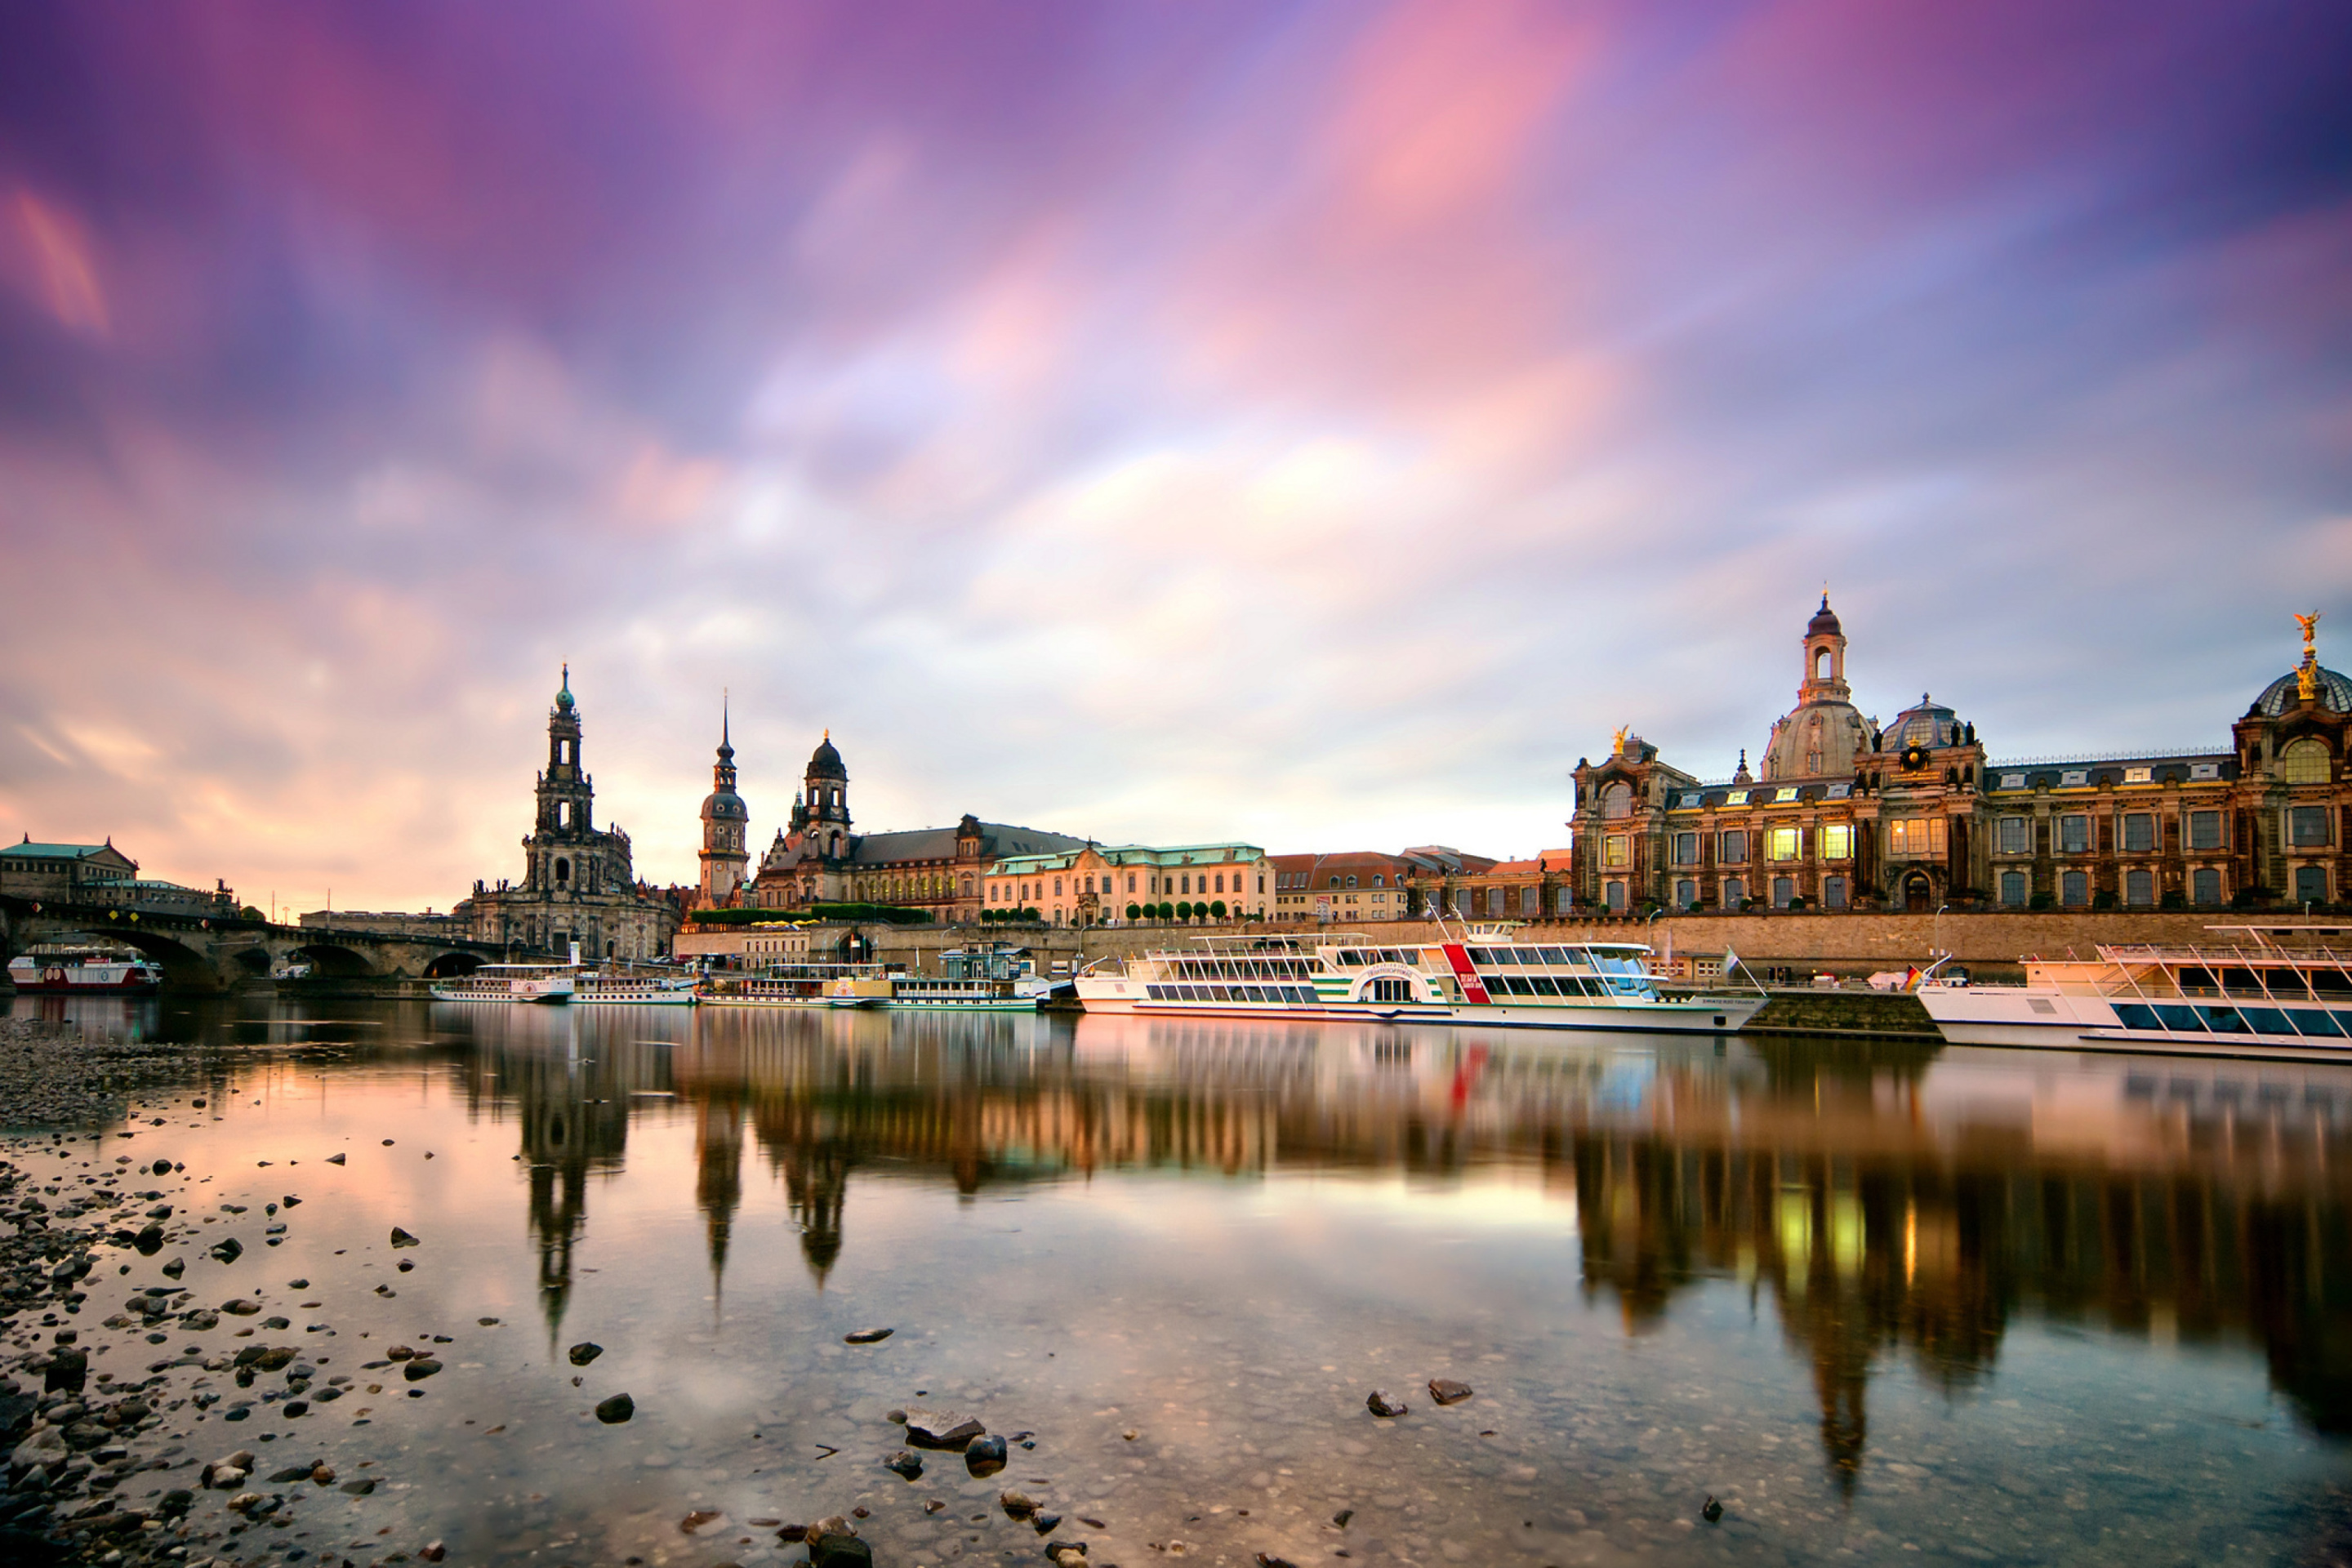 Dresden on Elbe River near Zwinger Palace wallpaper 2880x1920